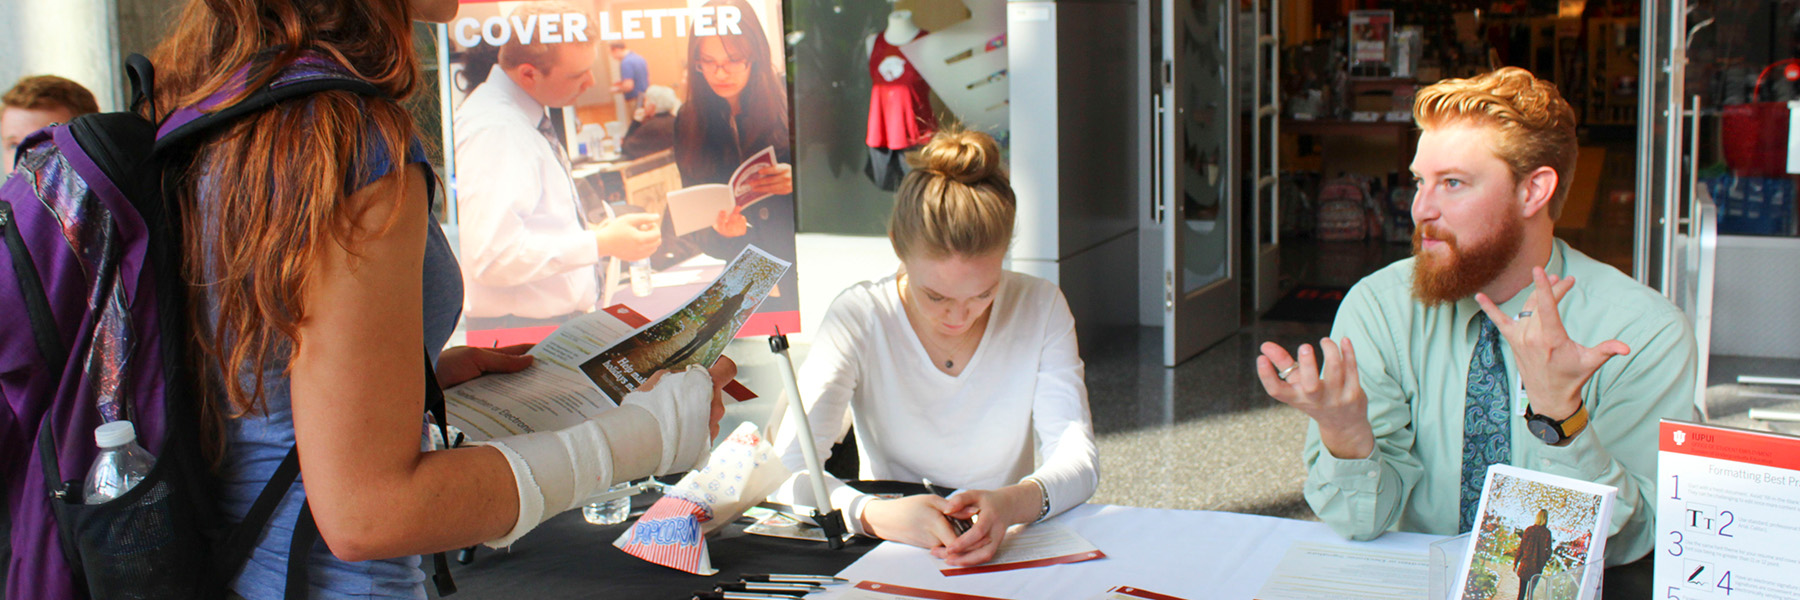 A student visiting a table in the Campus Center to discuss cover letters.